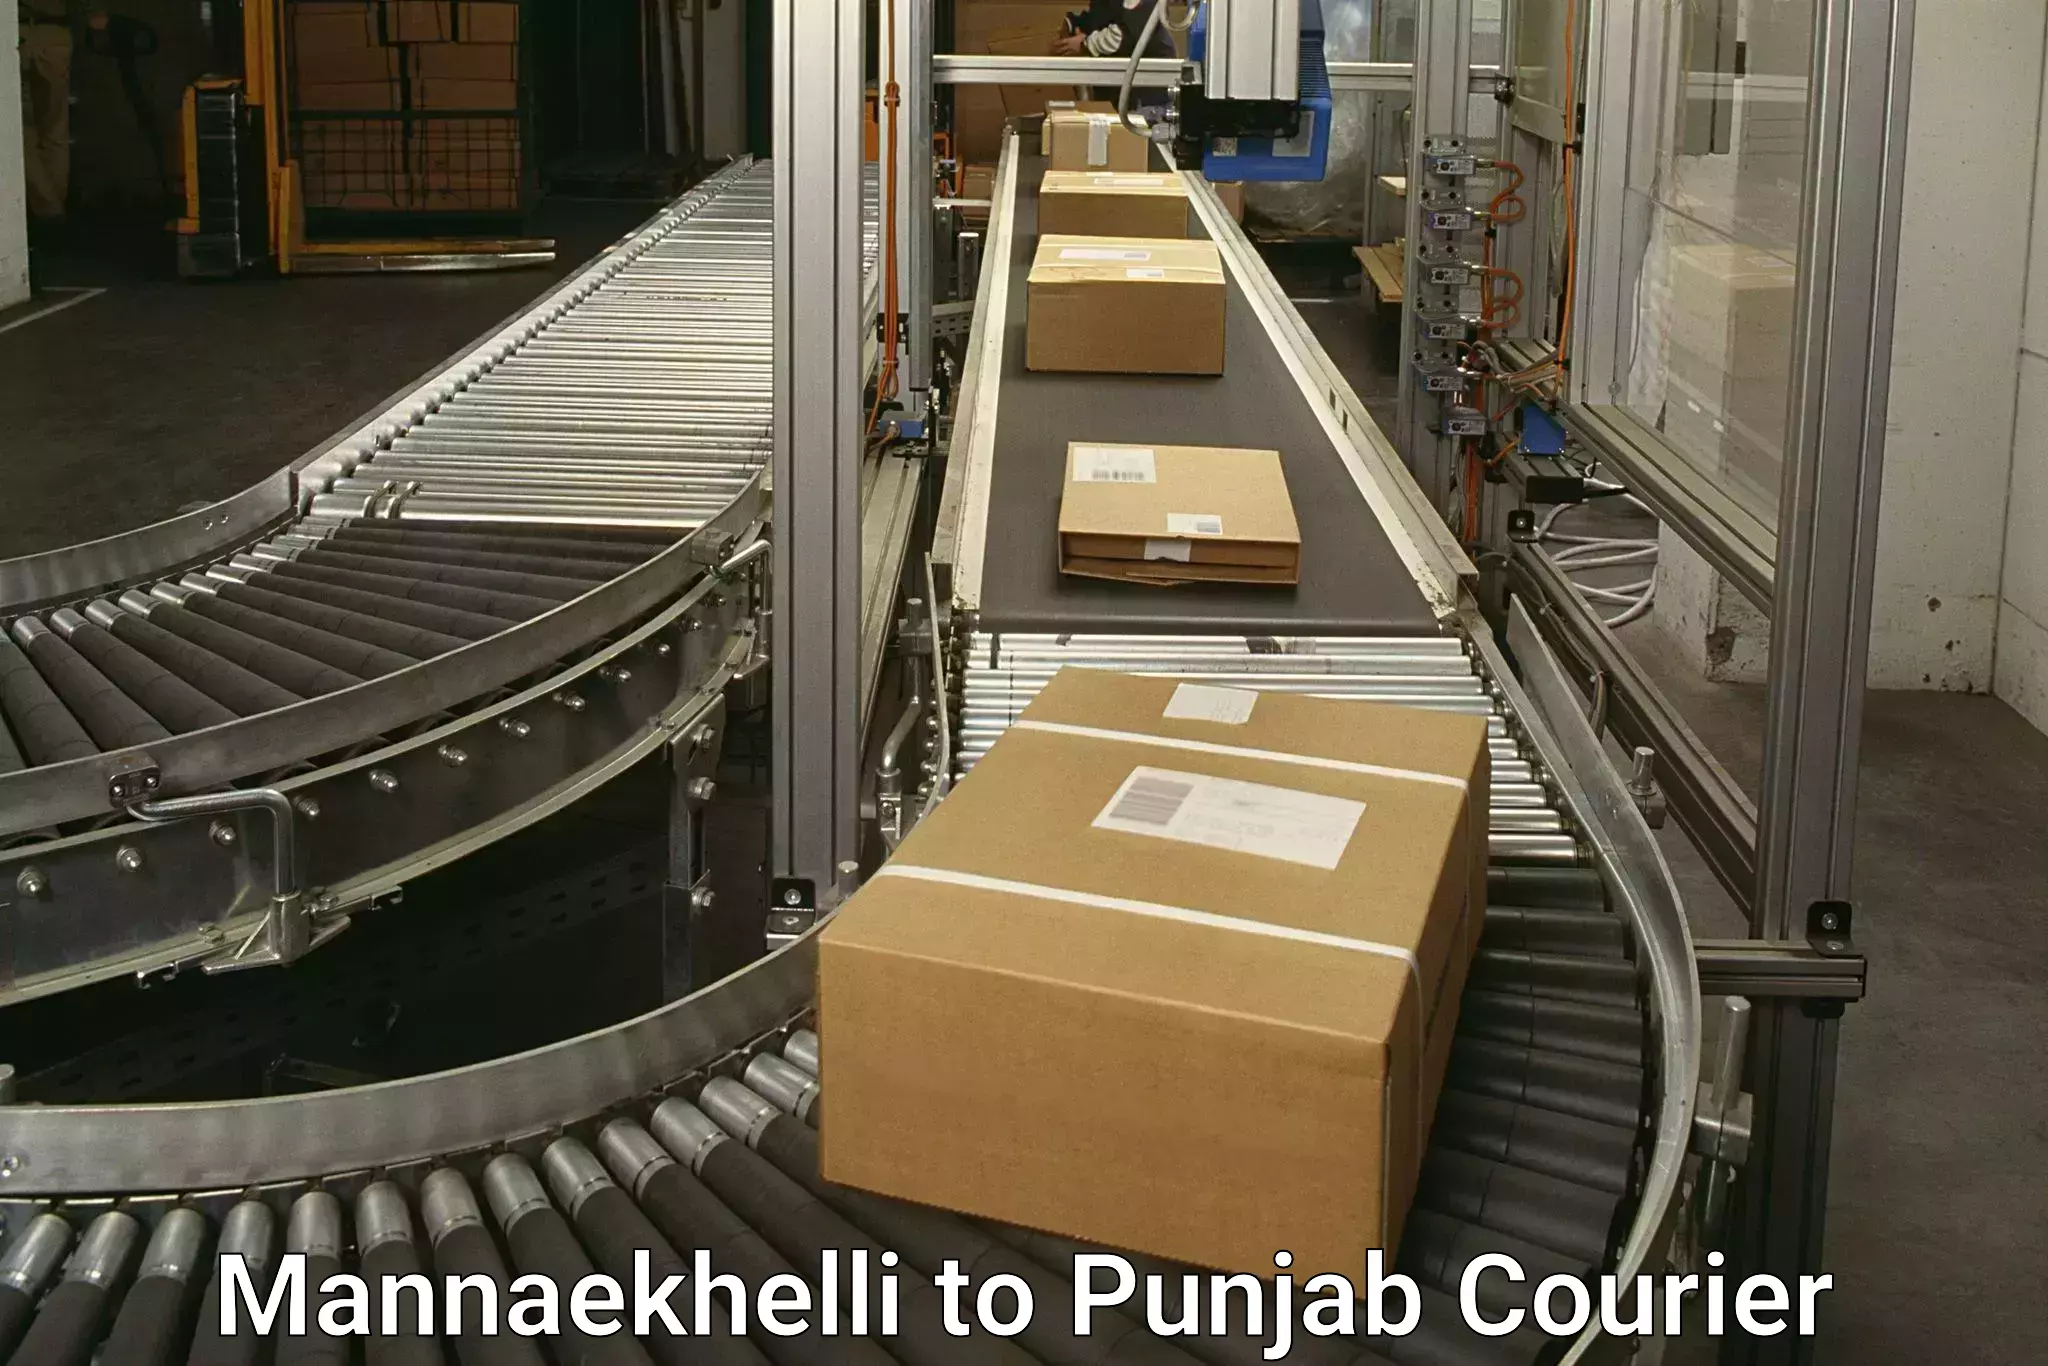 Same-day delivery solutions Mannaekhelli to Punjab